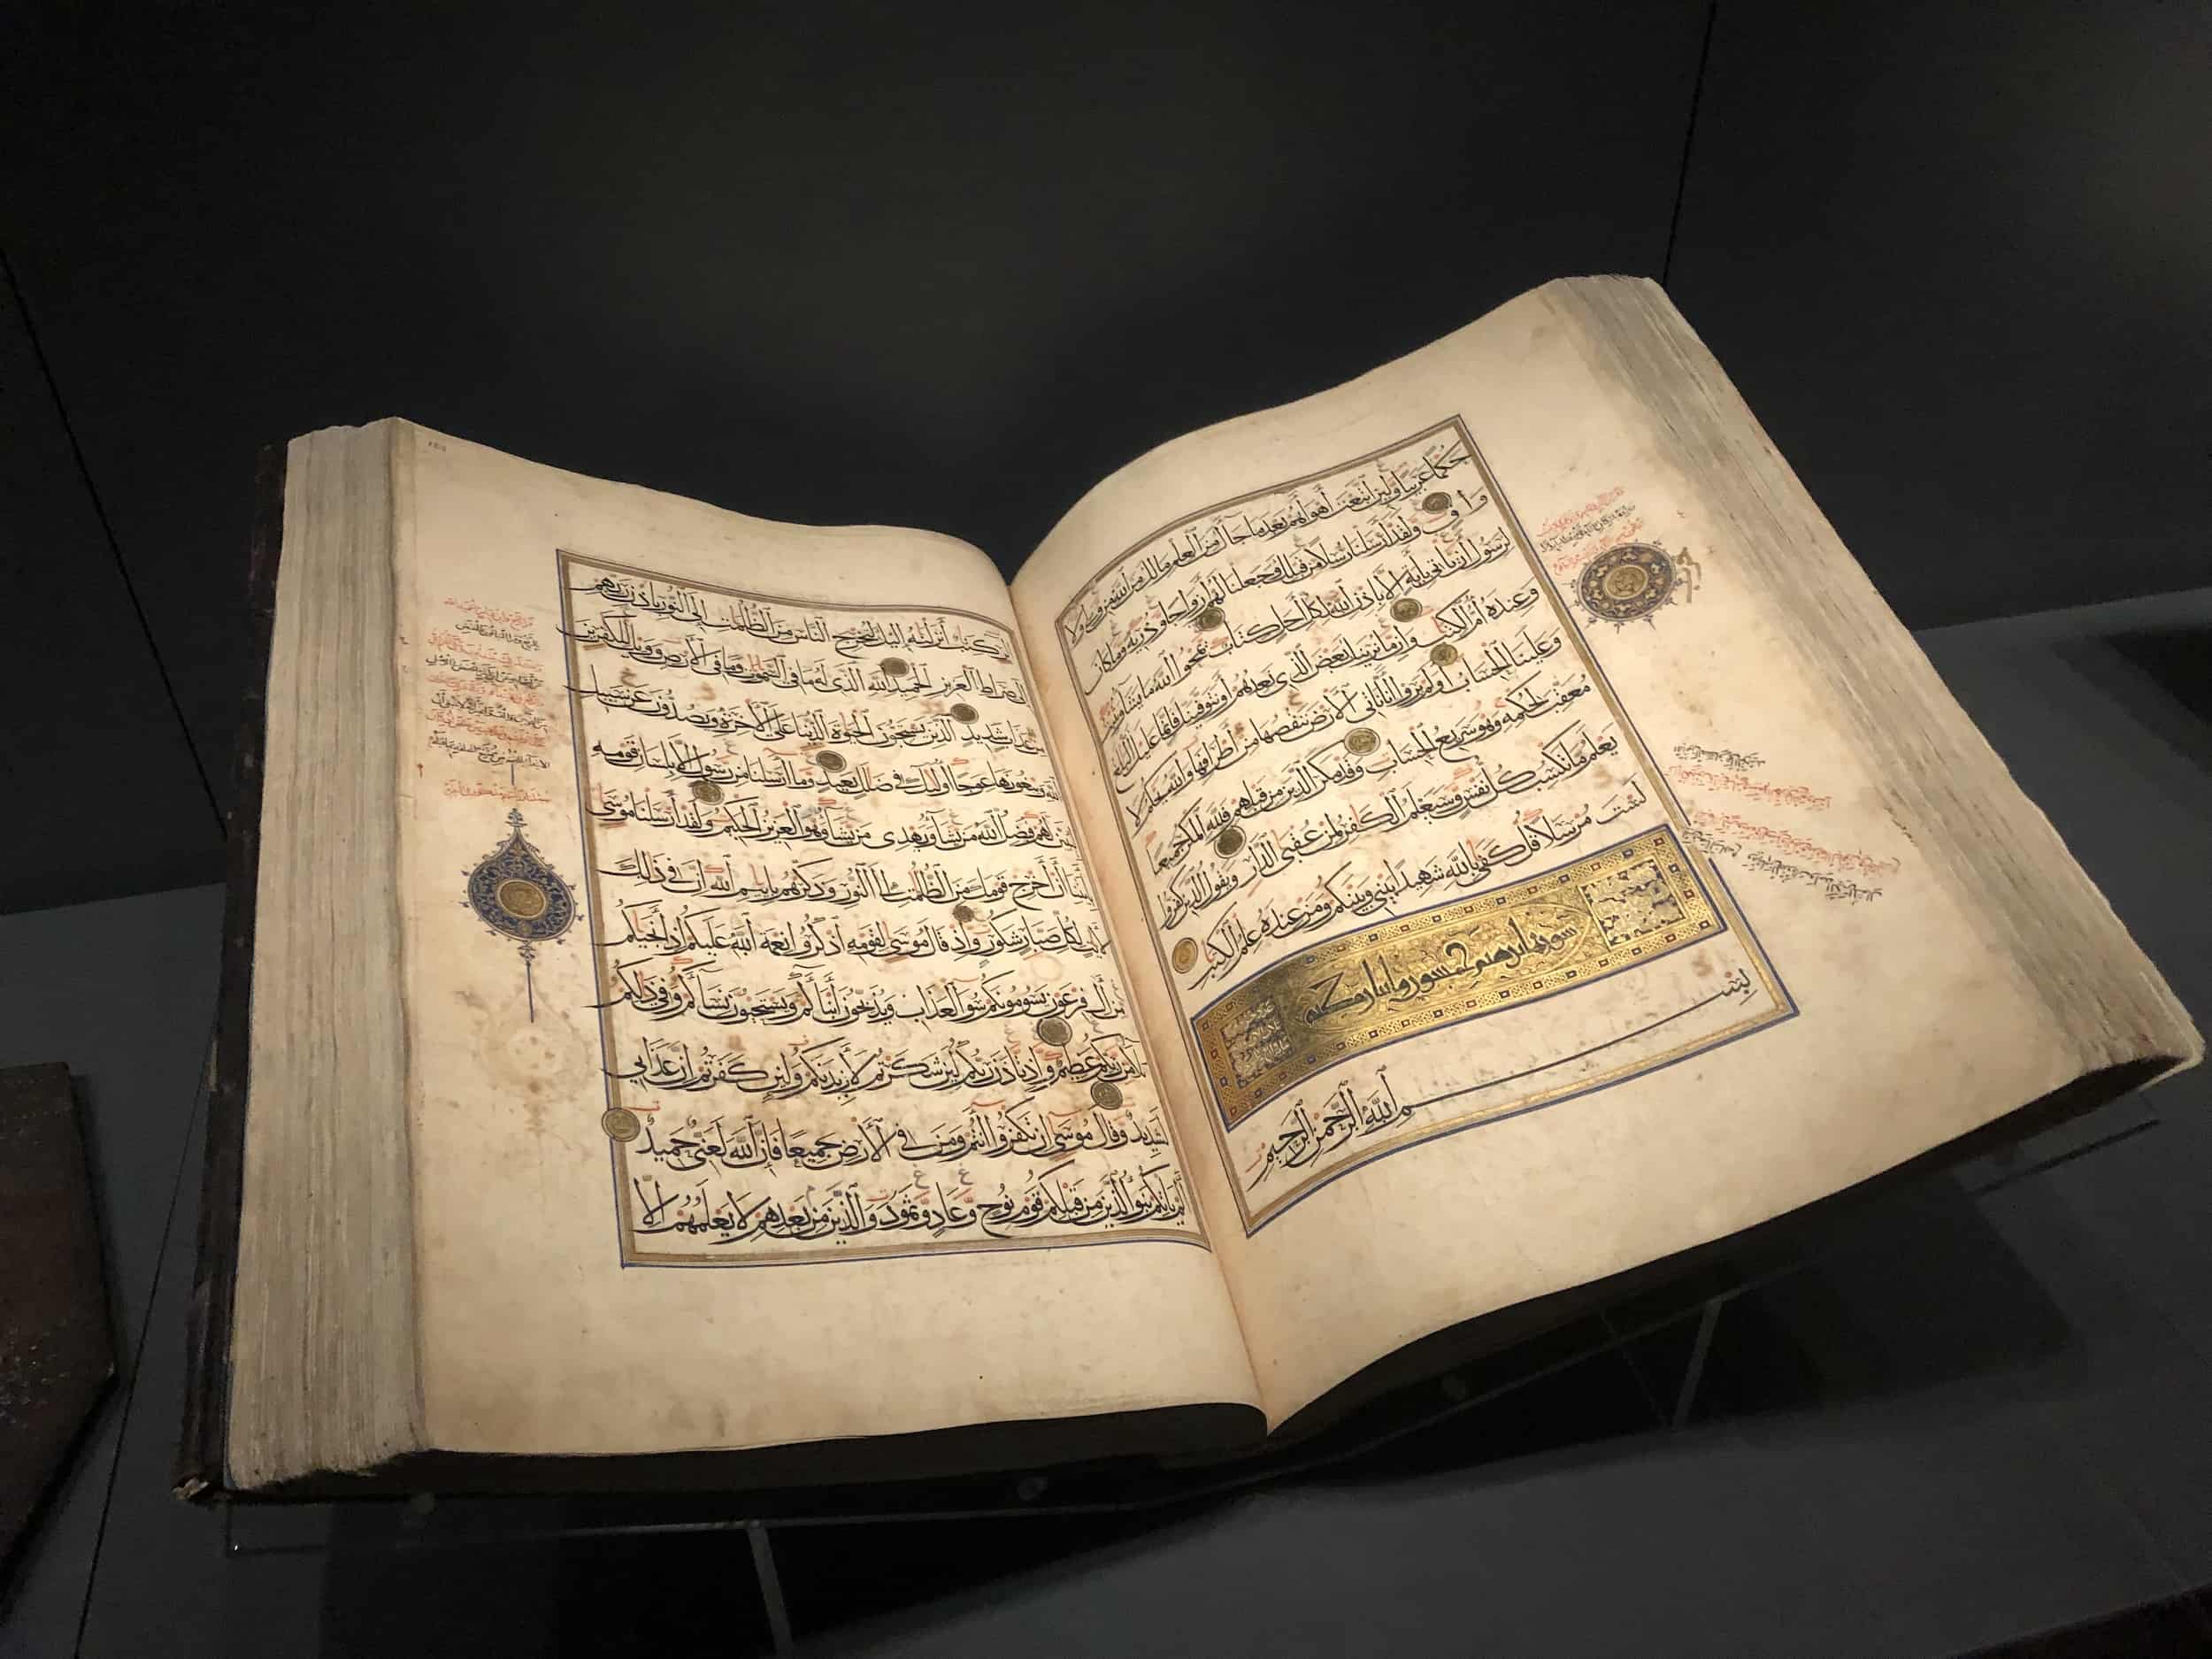 Quran from the Mamluk period